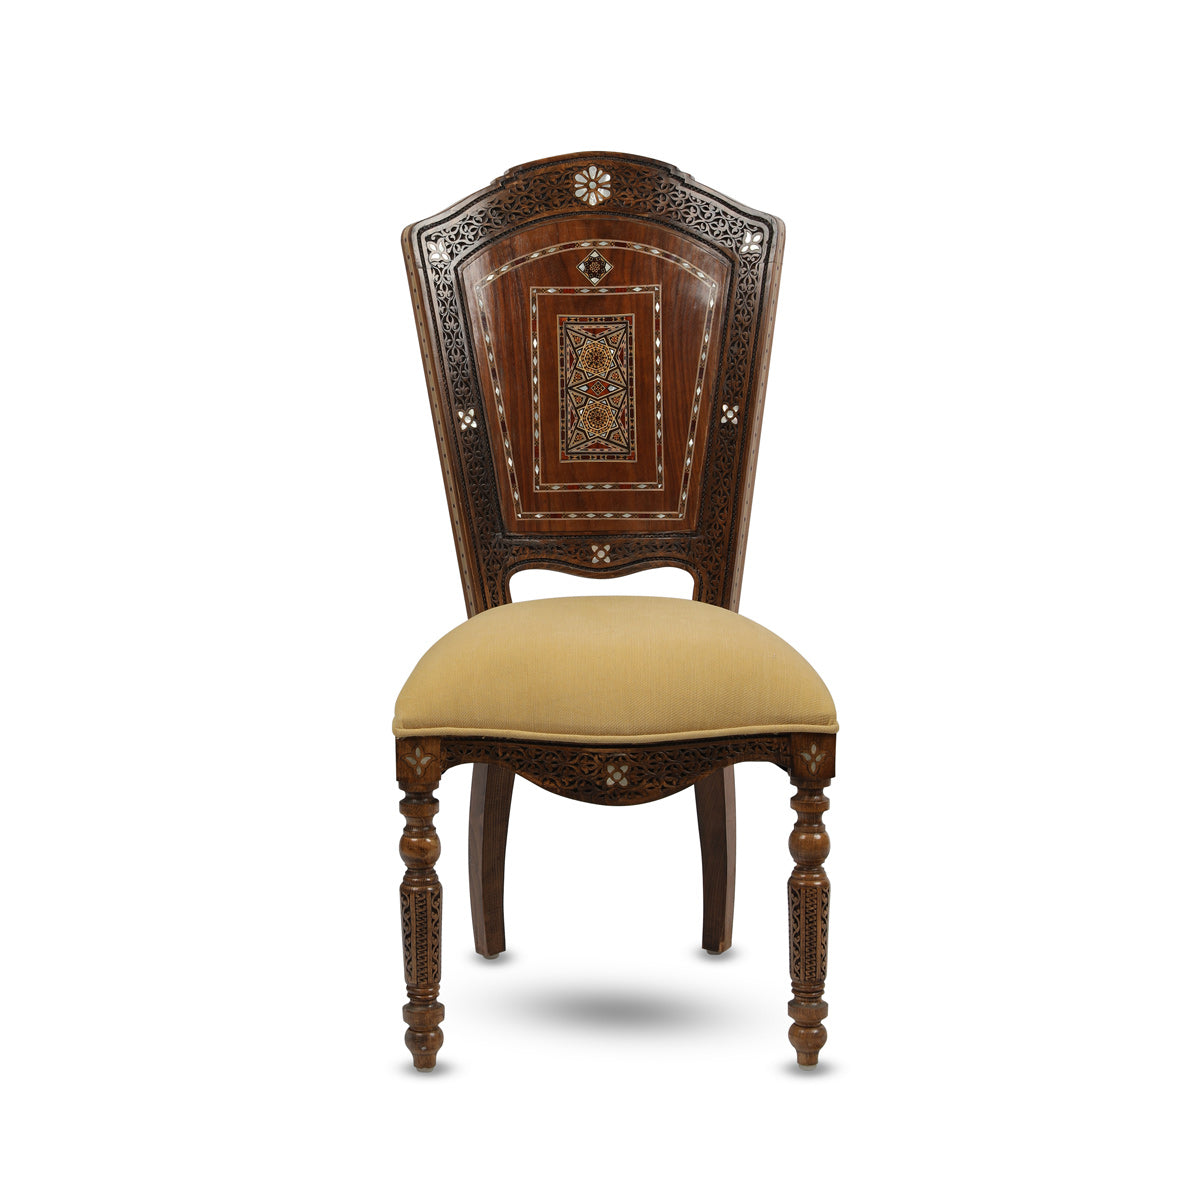 Front View of Solid Syrian Flat Back Wooden Chair